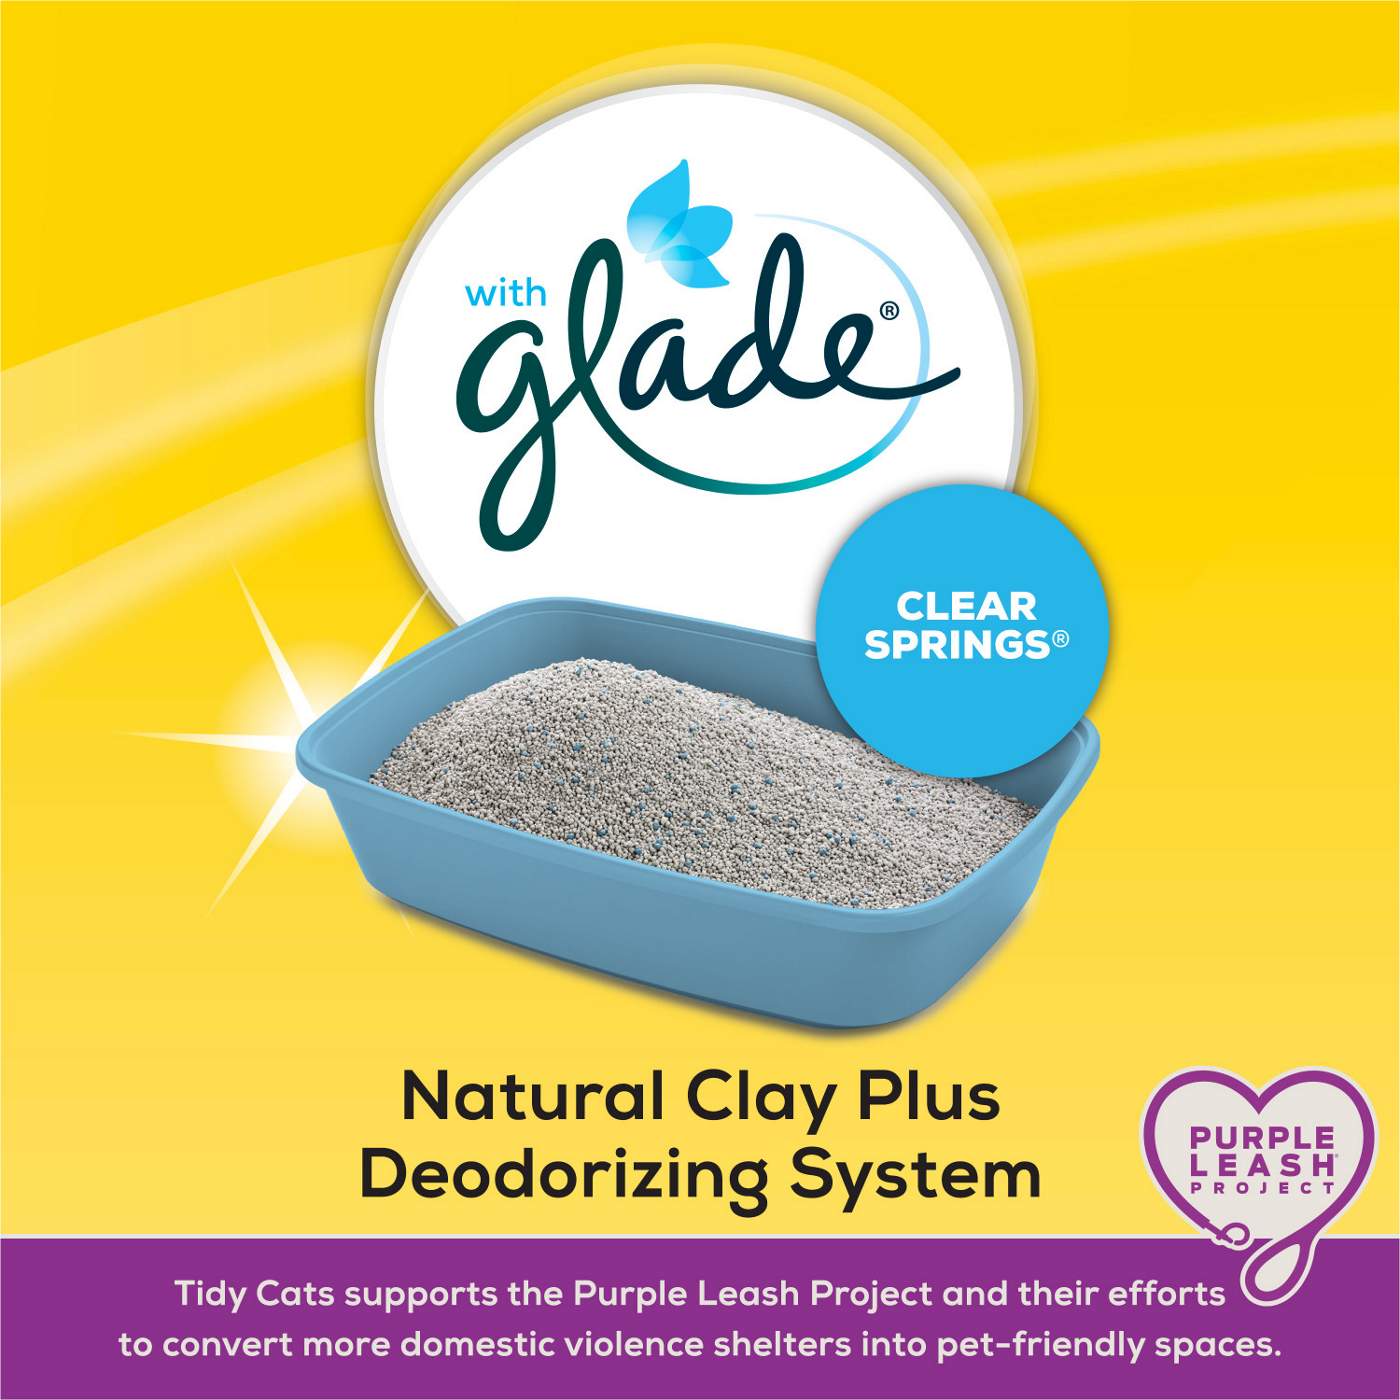 Tidy Cats Purina Tidy Cats Clumping Cat Litter, Glade Clear Springs Multi Cat Litter; image 2 of 3